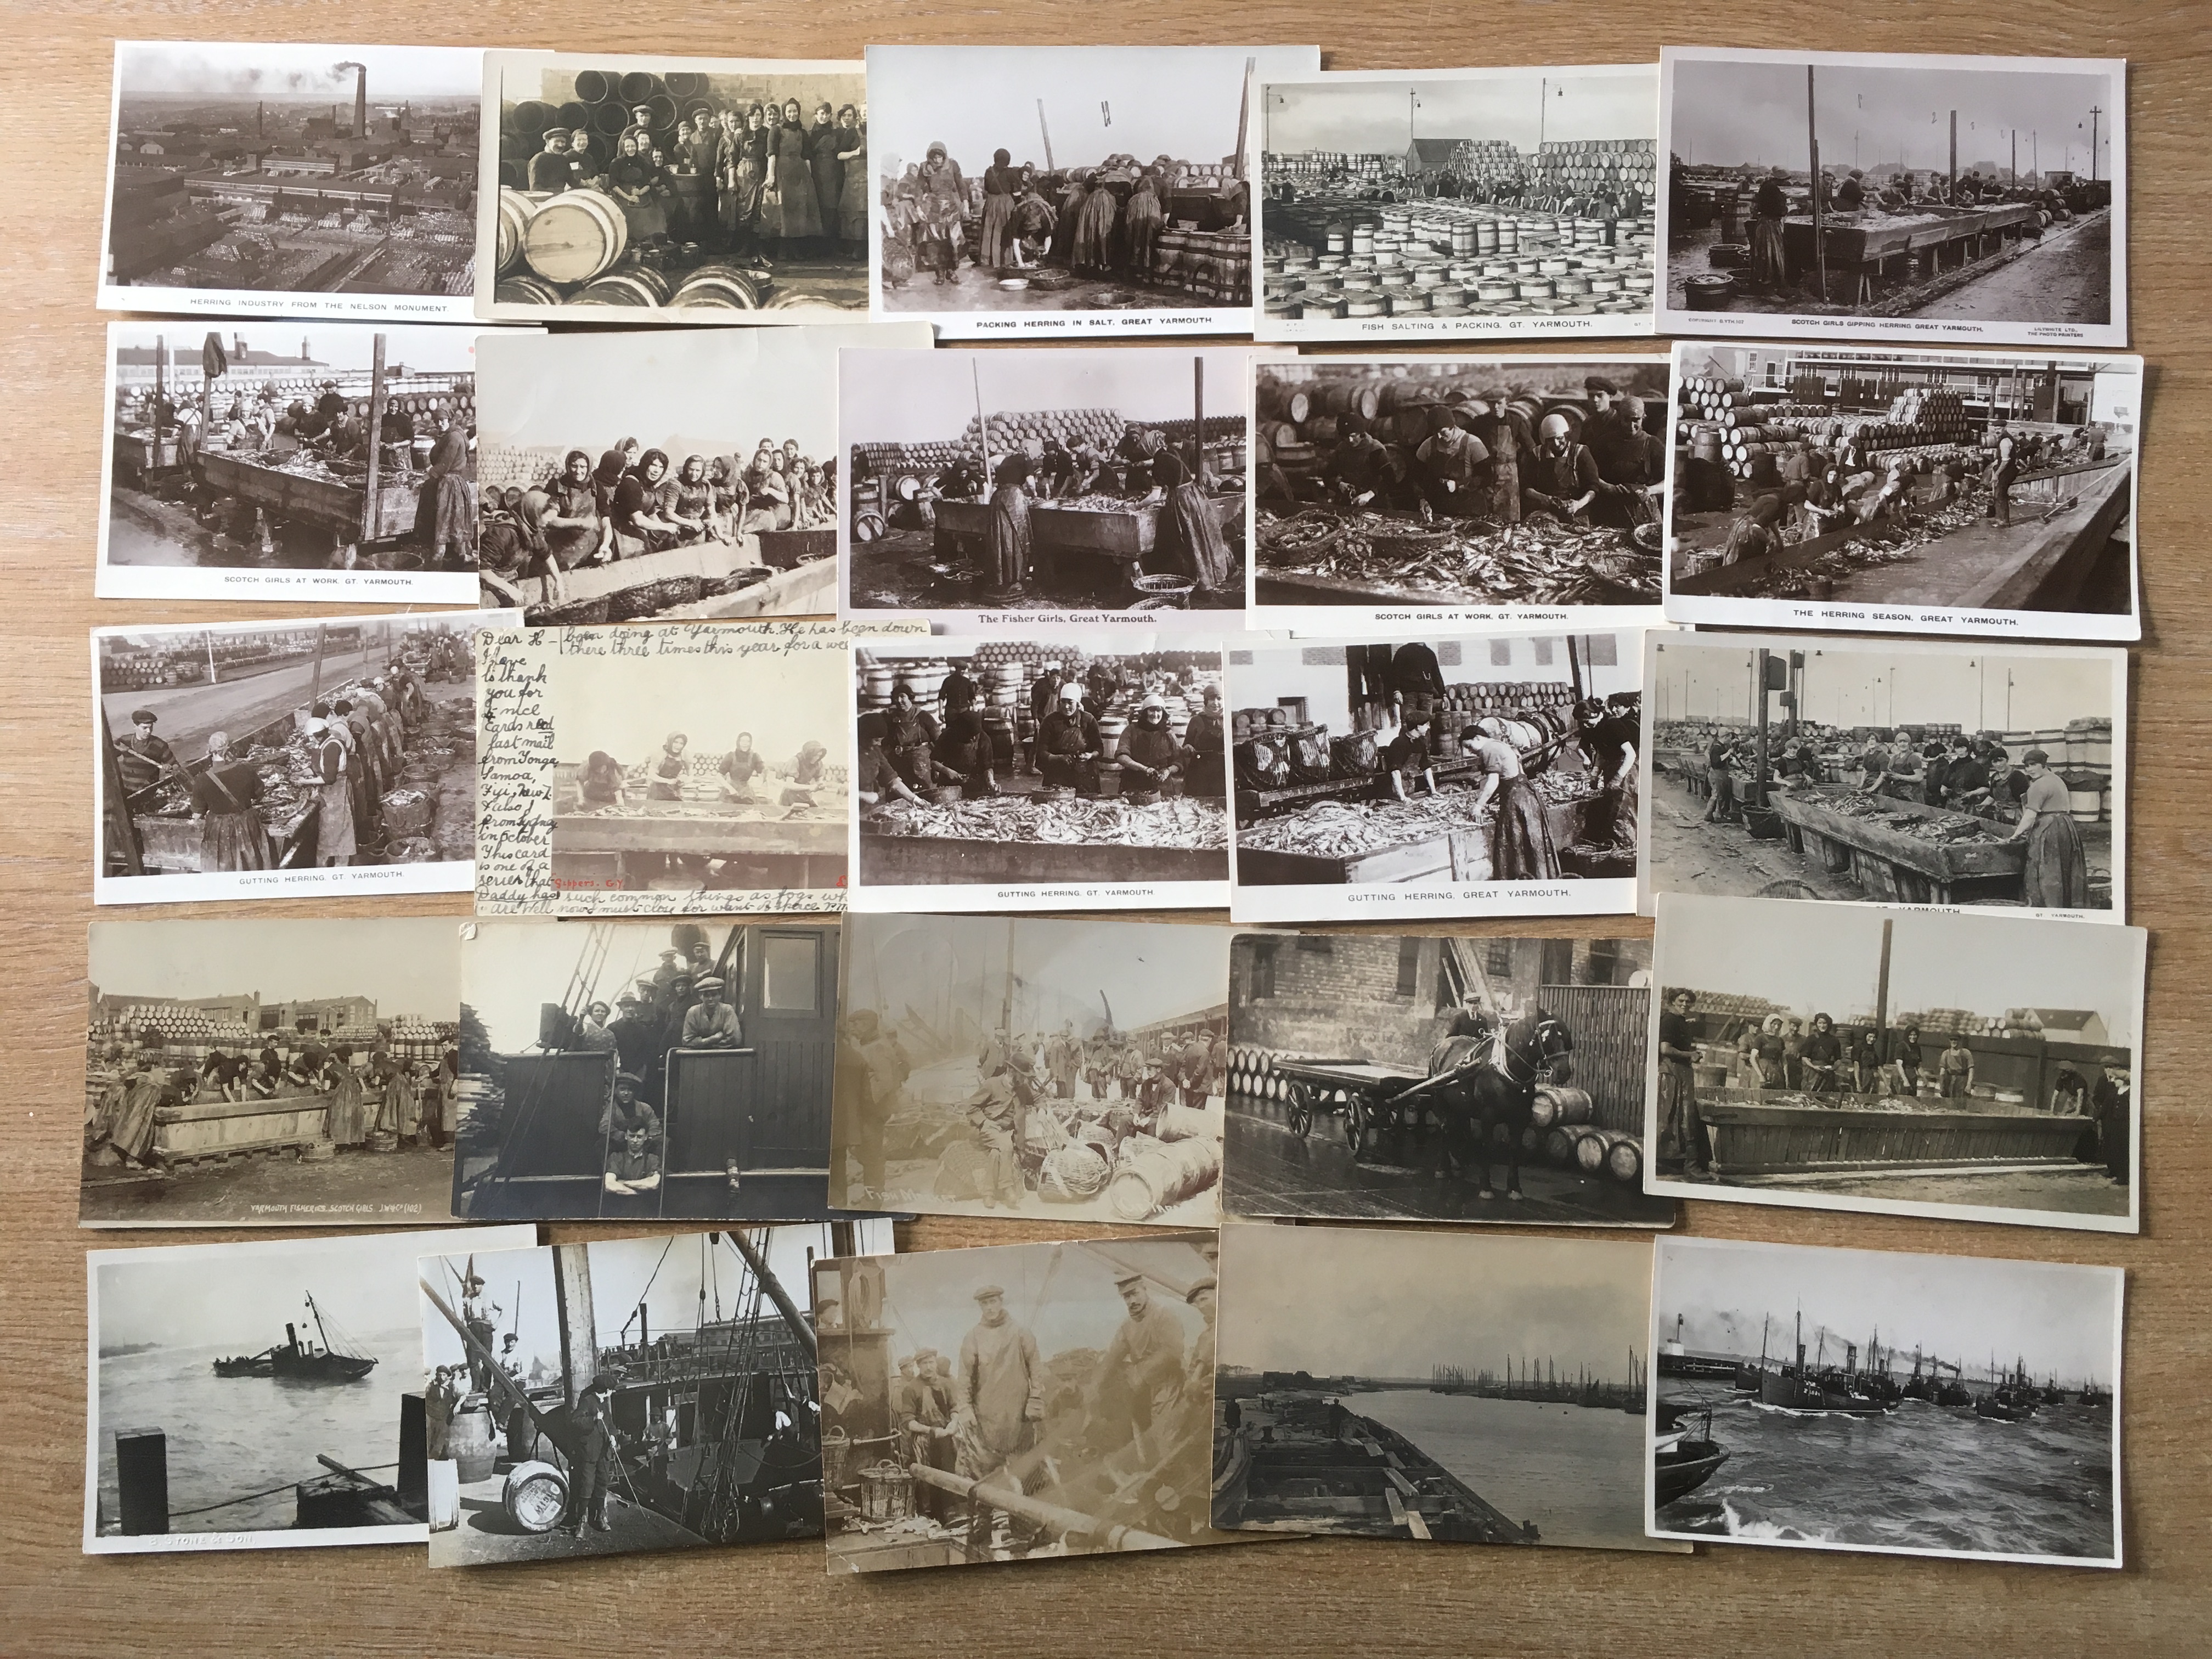 NORFOLK: GREAT YARMOUTH AND GORLESTON FISHING INDUSTRY POSTCARDS, ALL RP WITH FISHER GIRLS, - Image 2 of 2